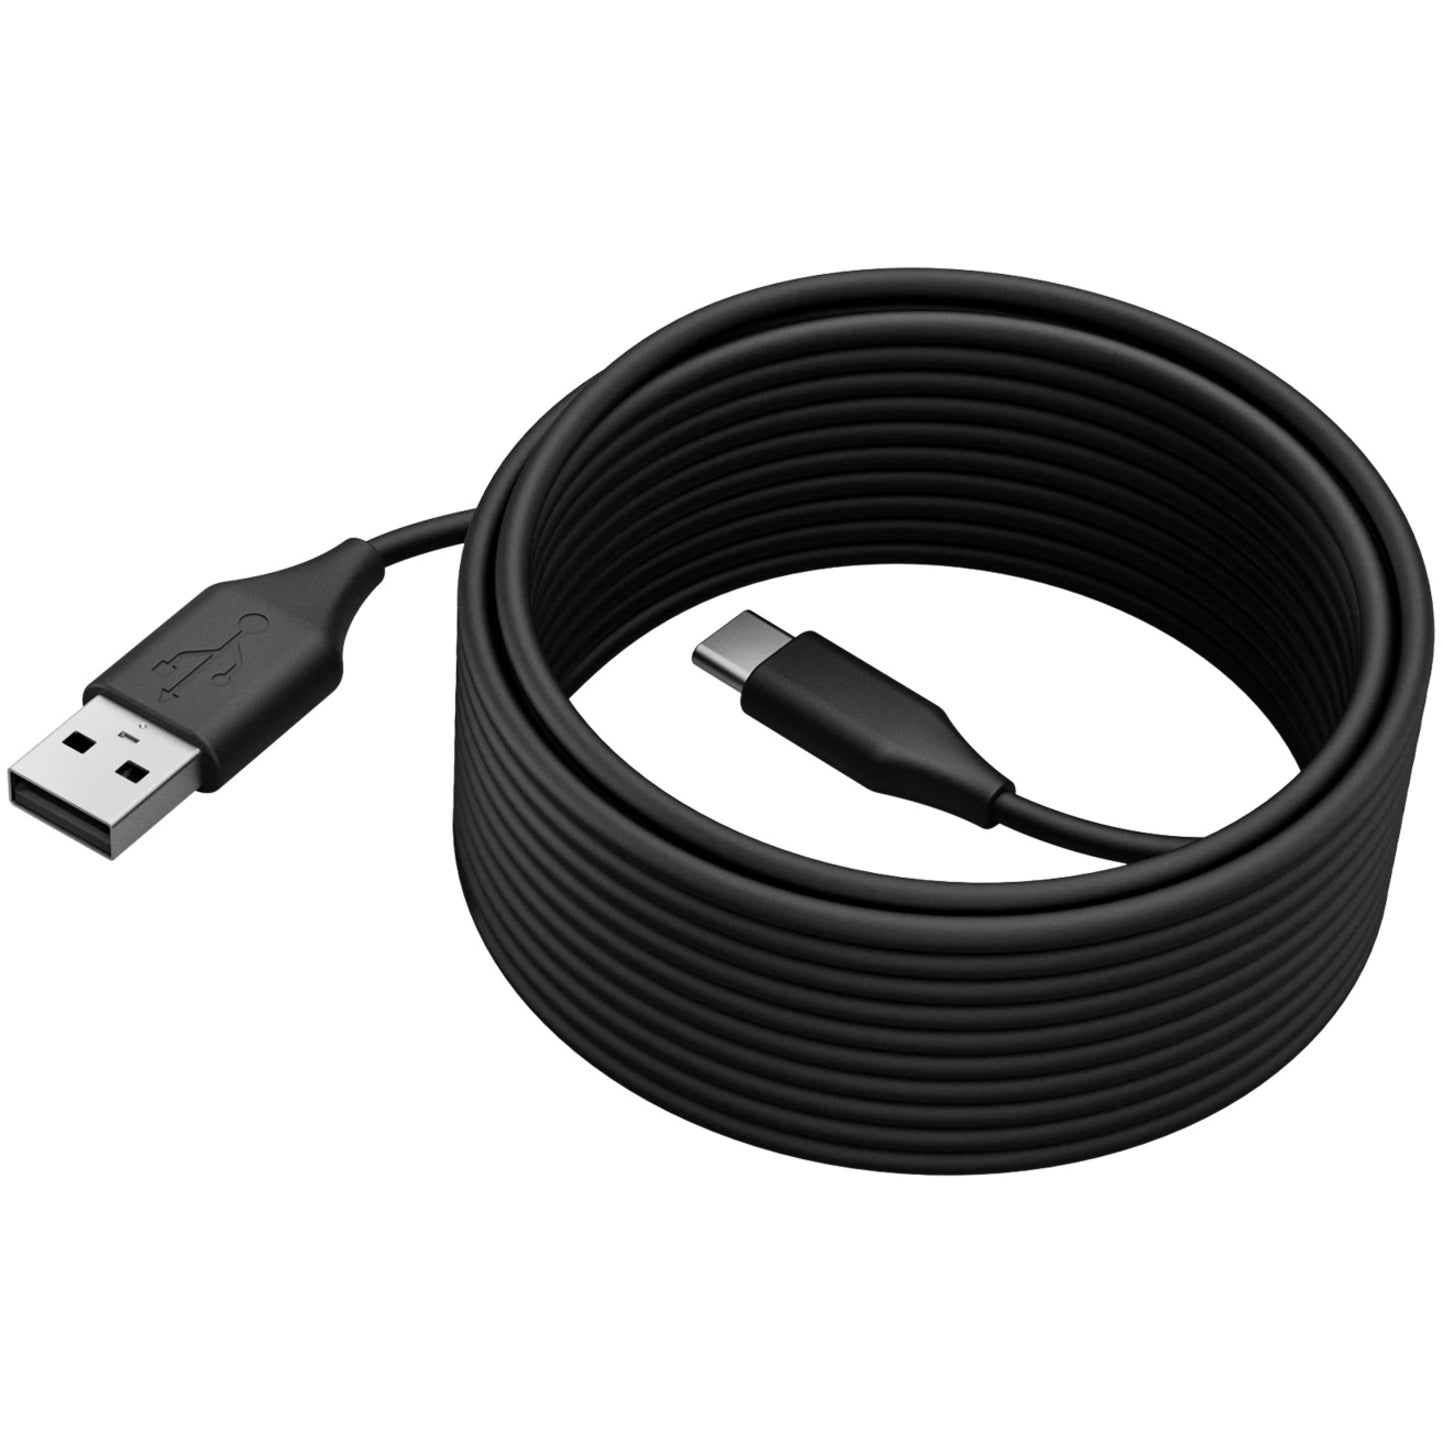 Jabra 14202-11 PanaCast 50 USB Cable, 16.40 ft Data Transfer Cable